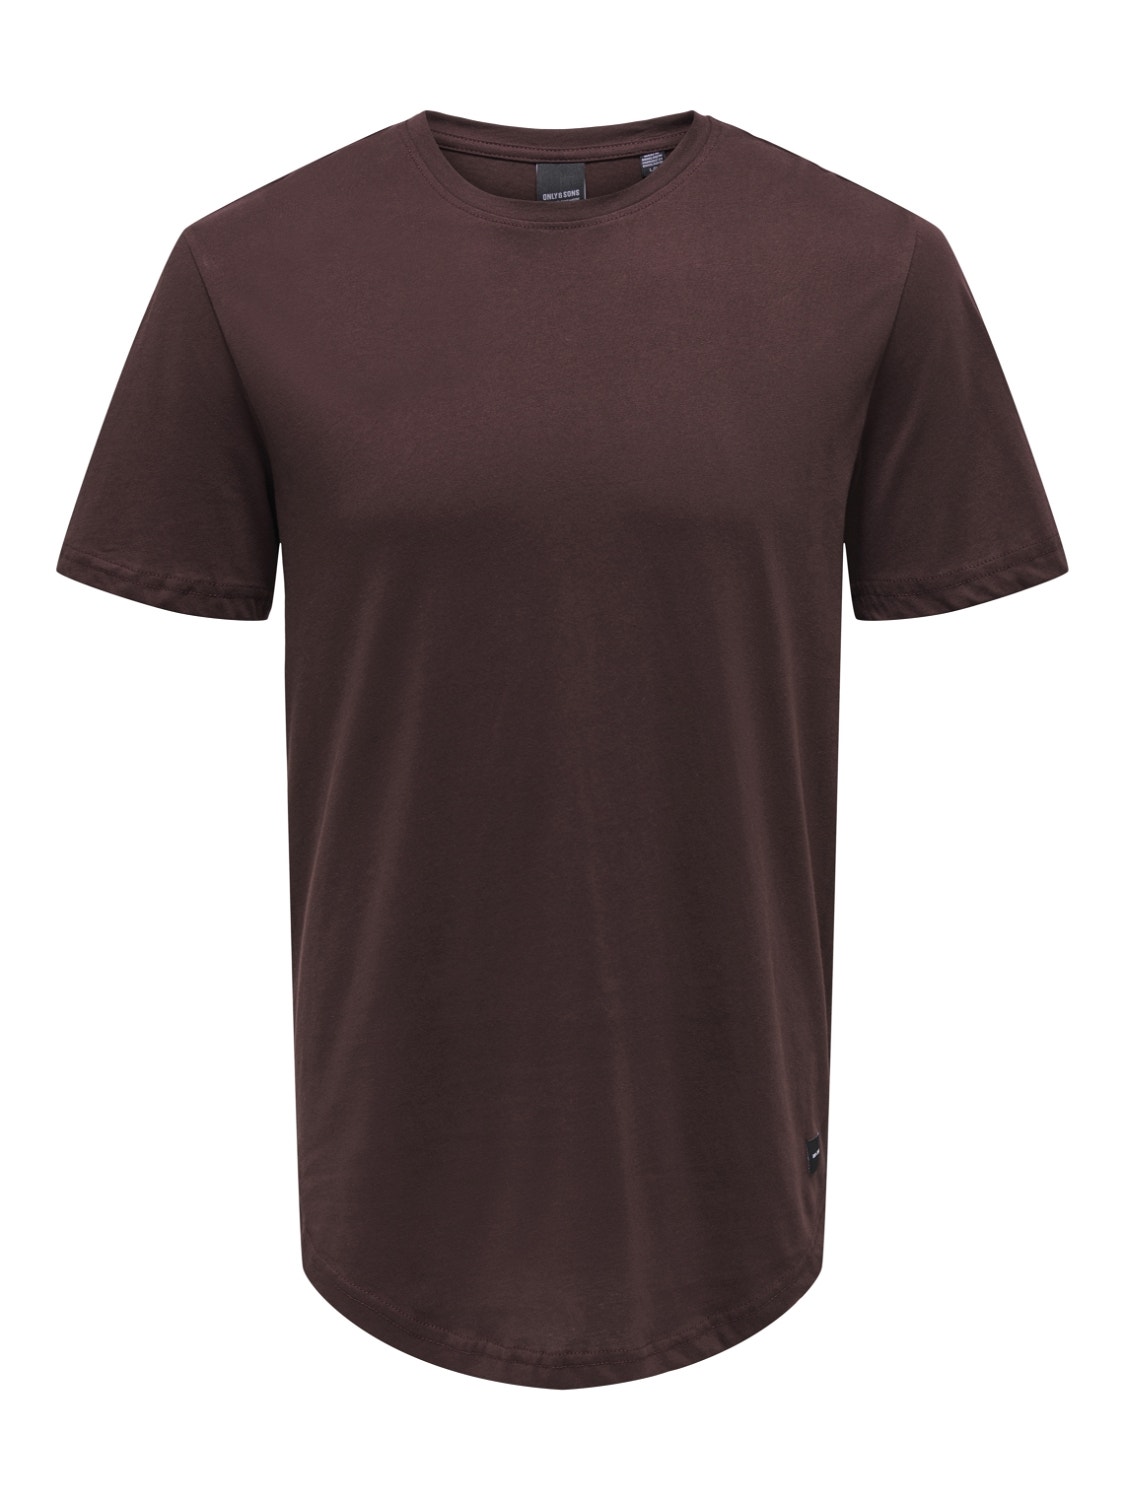 ONLY & SONS Long Line Fit O-ringning T-shirt -Fudge - 22002973